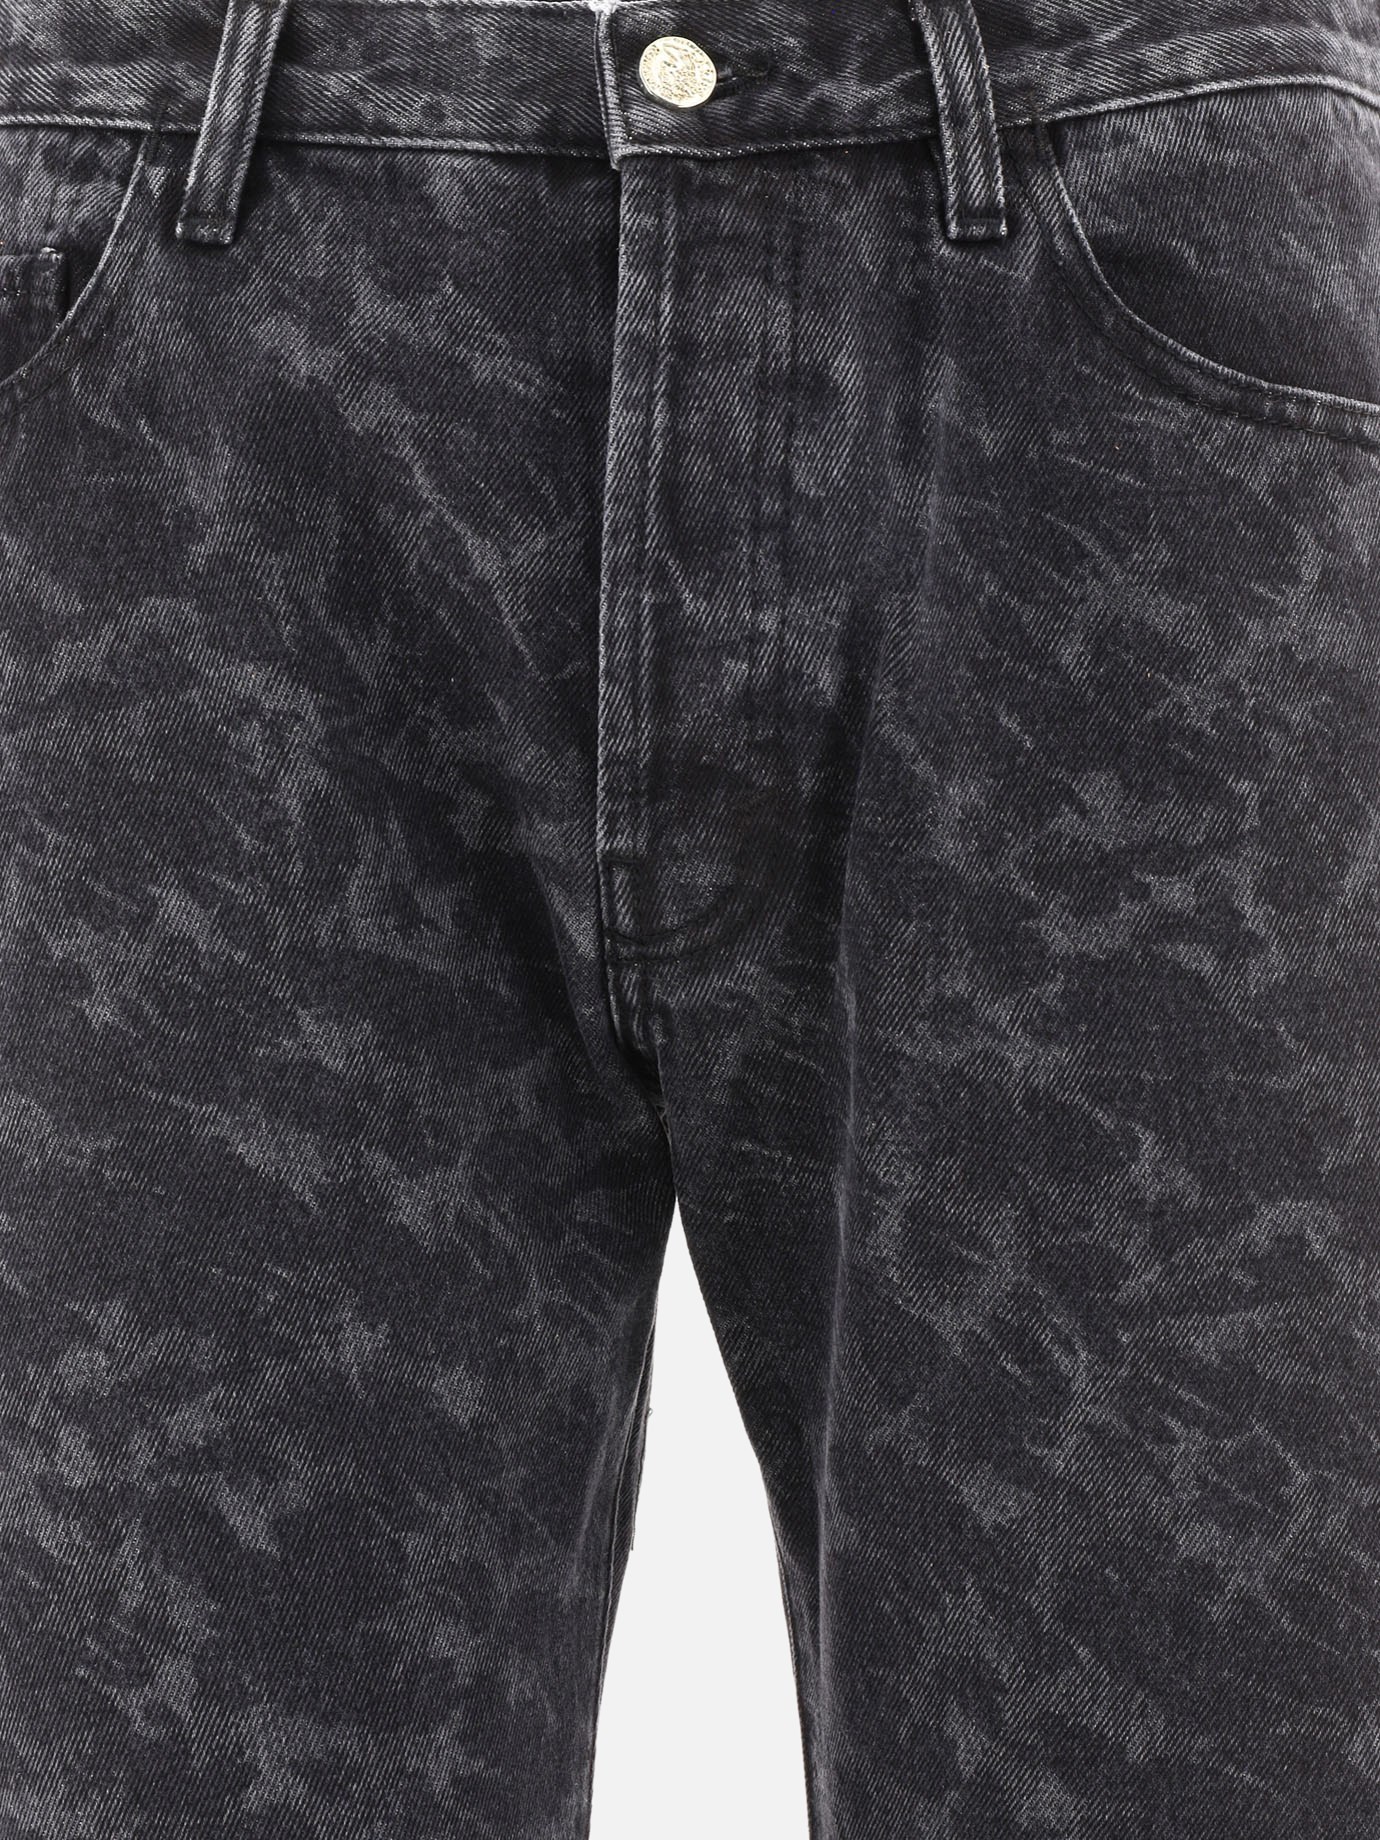 Jeans  Death Metal Lilly  by Aries